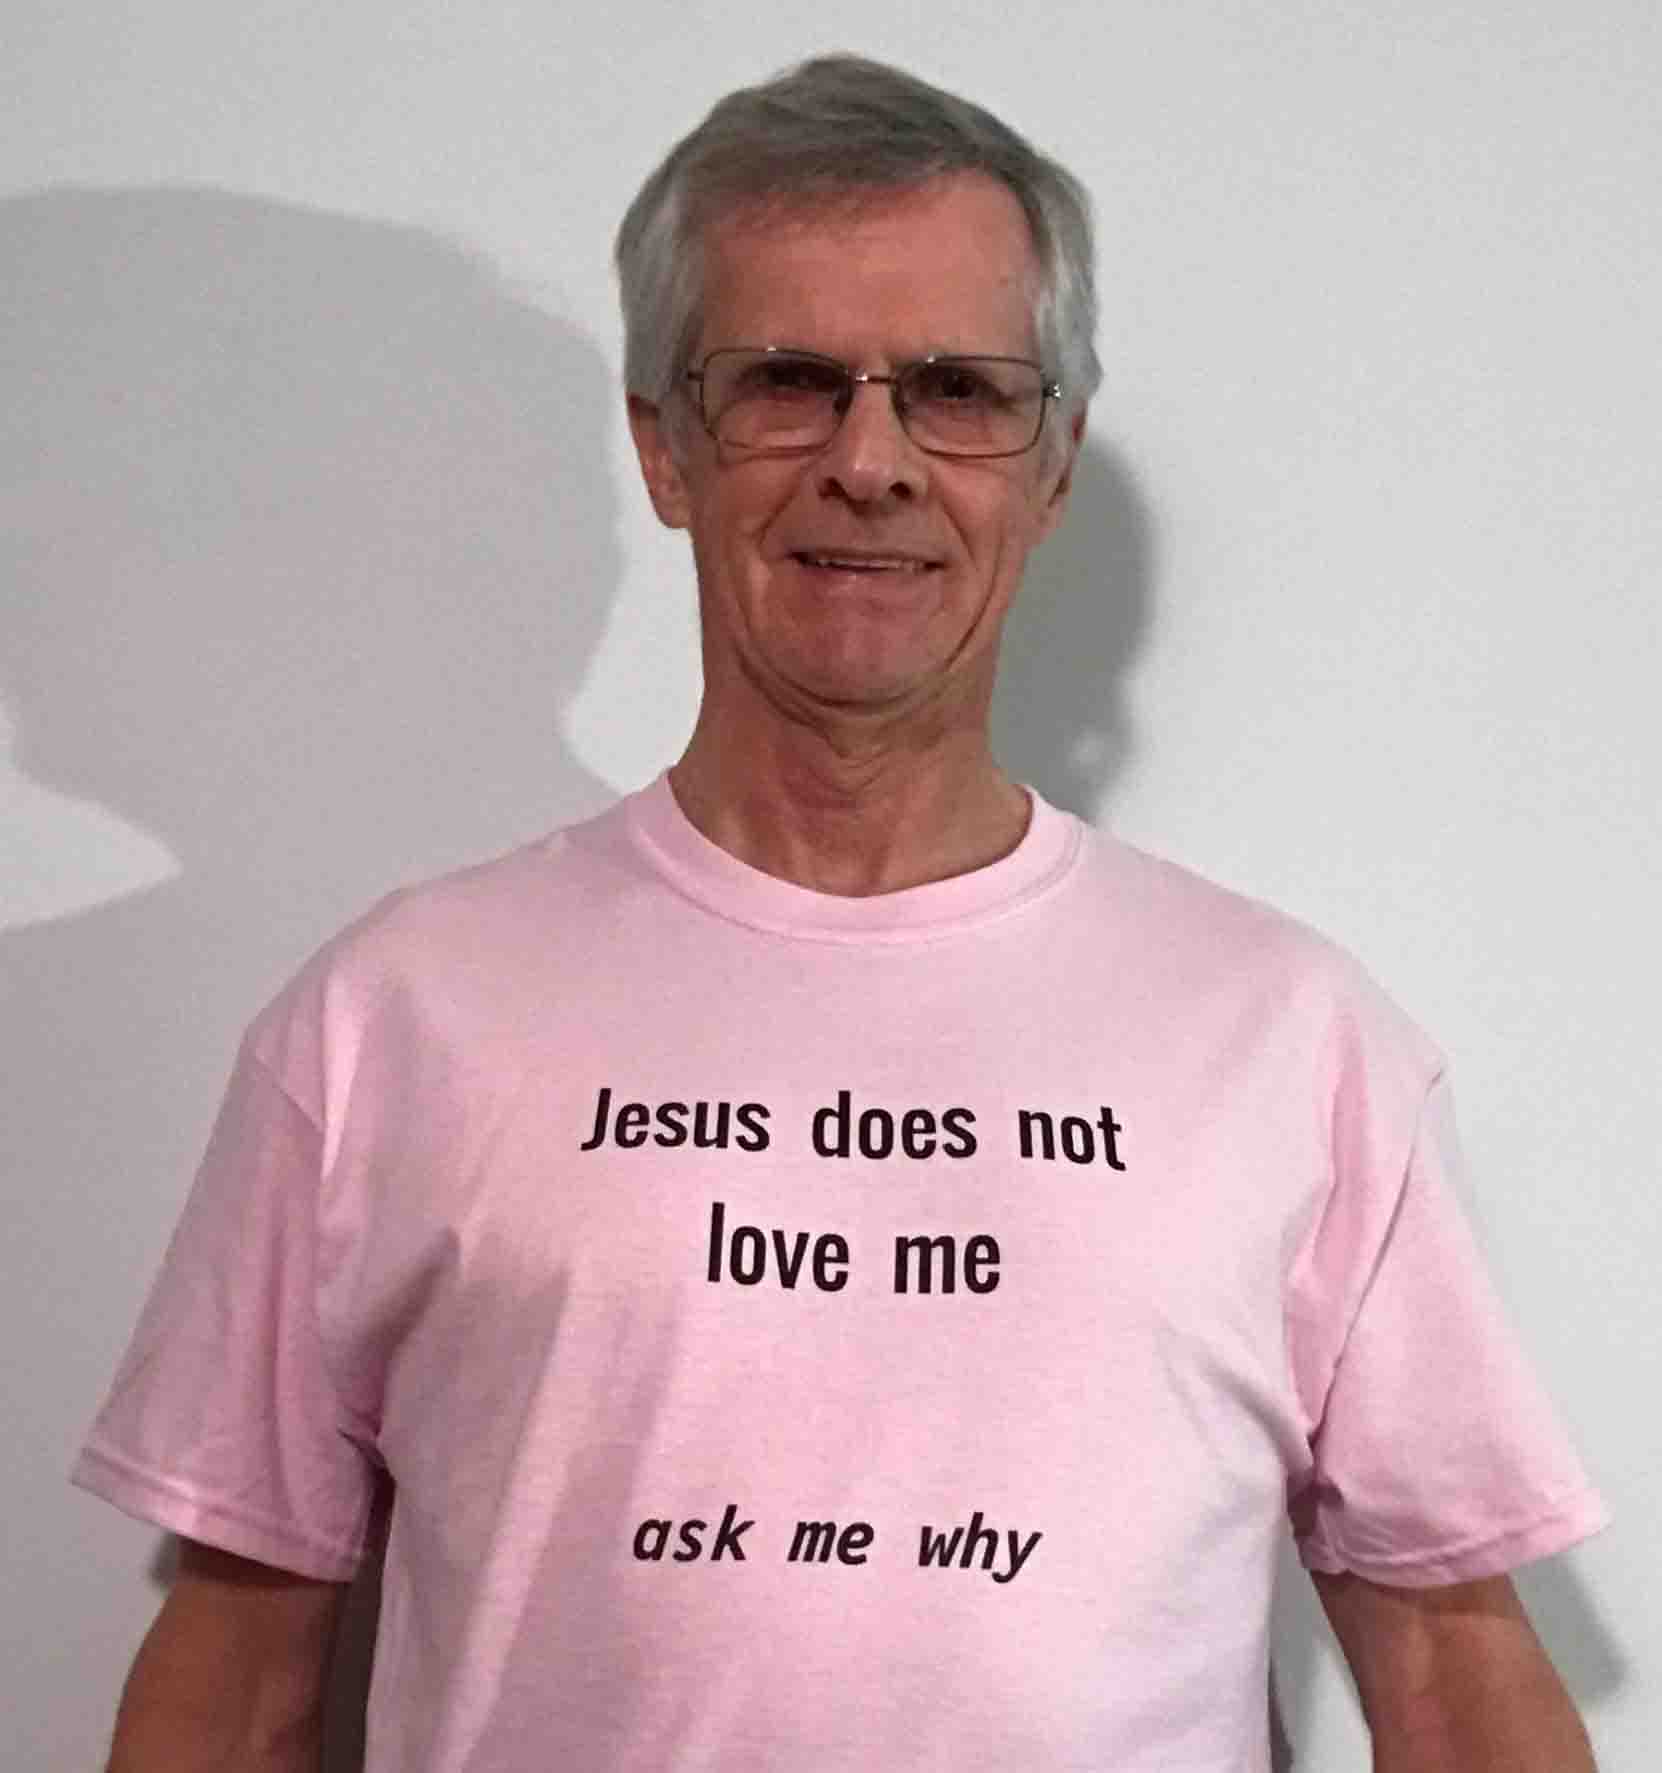 Darwin Bedford wearing his shirt that says 'Jesus does not love me, ask me why'